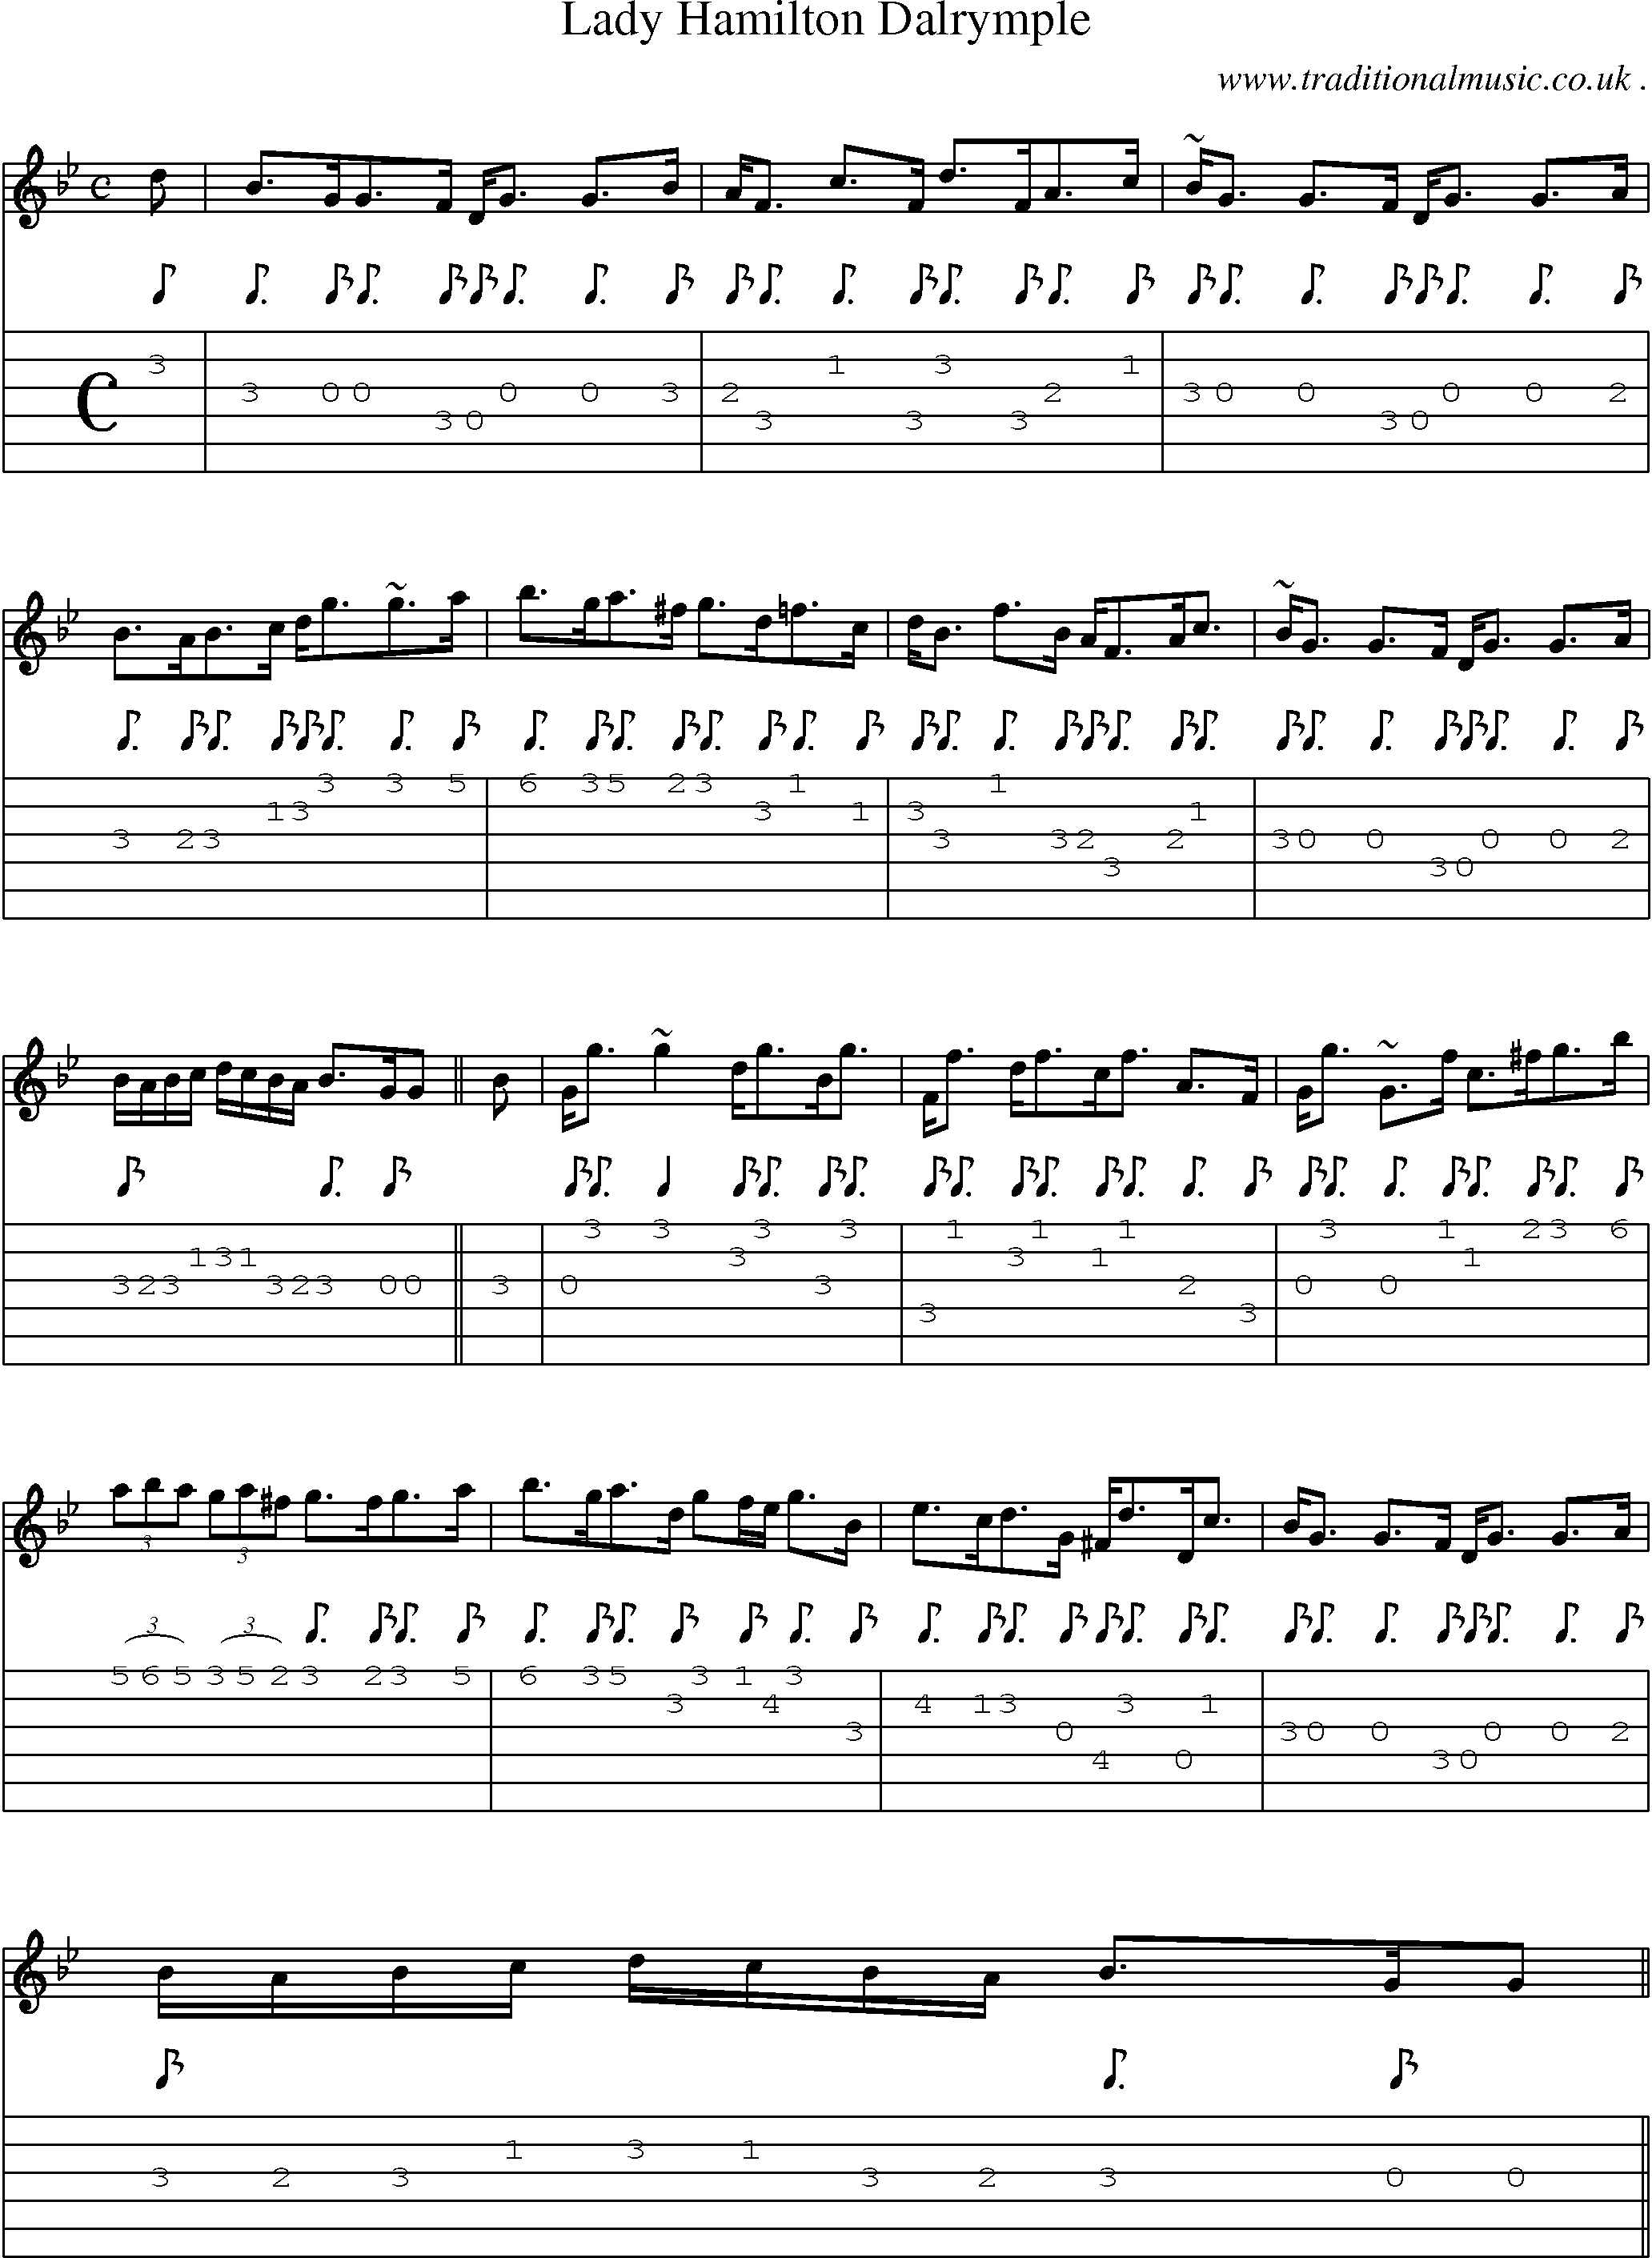 Sheet-music  score, Chords and Guitar Tabs for Lady Hamilton Dalrymple